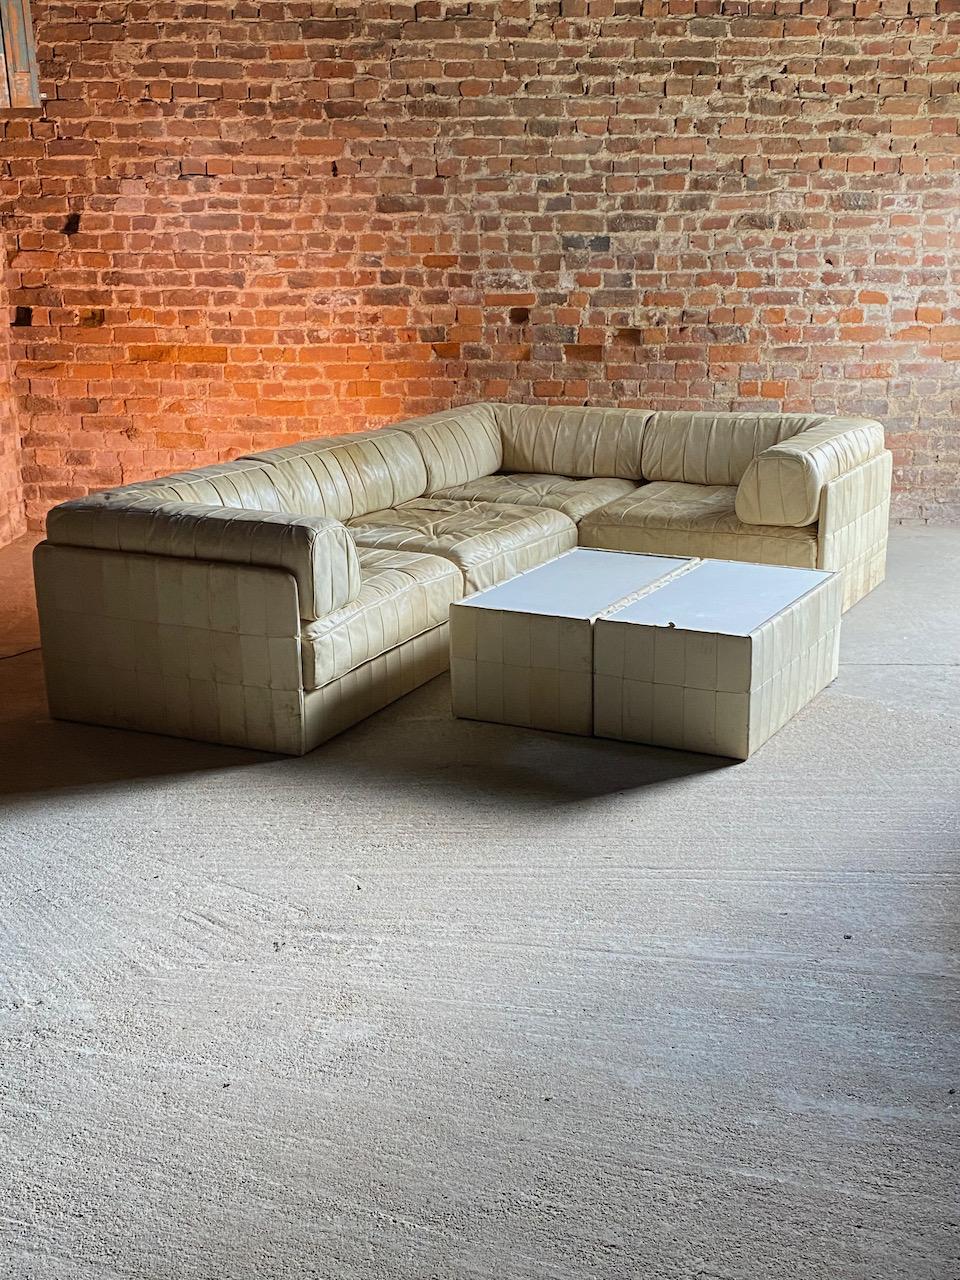 De Sede Model DS88 sectional sofa cream leather, 1970

De Sede Model DS88 cream patchwork leather sectional sofa Switzerland circa 1970, This sublime four sectional sofa is made by quality manufacturer De Sede in Switzerland, known for their